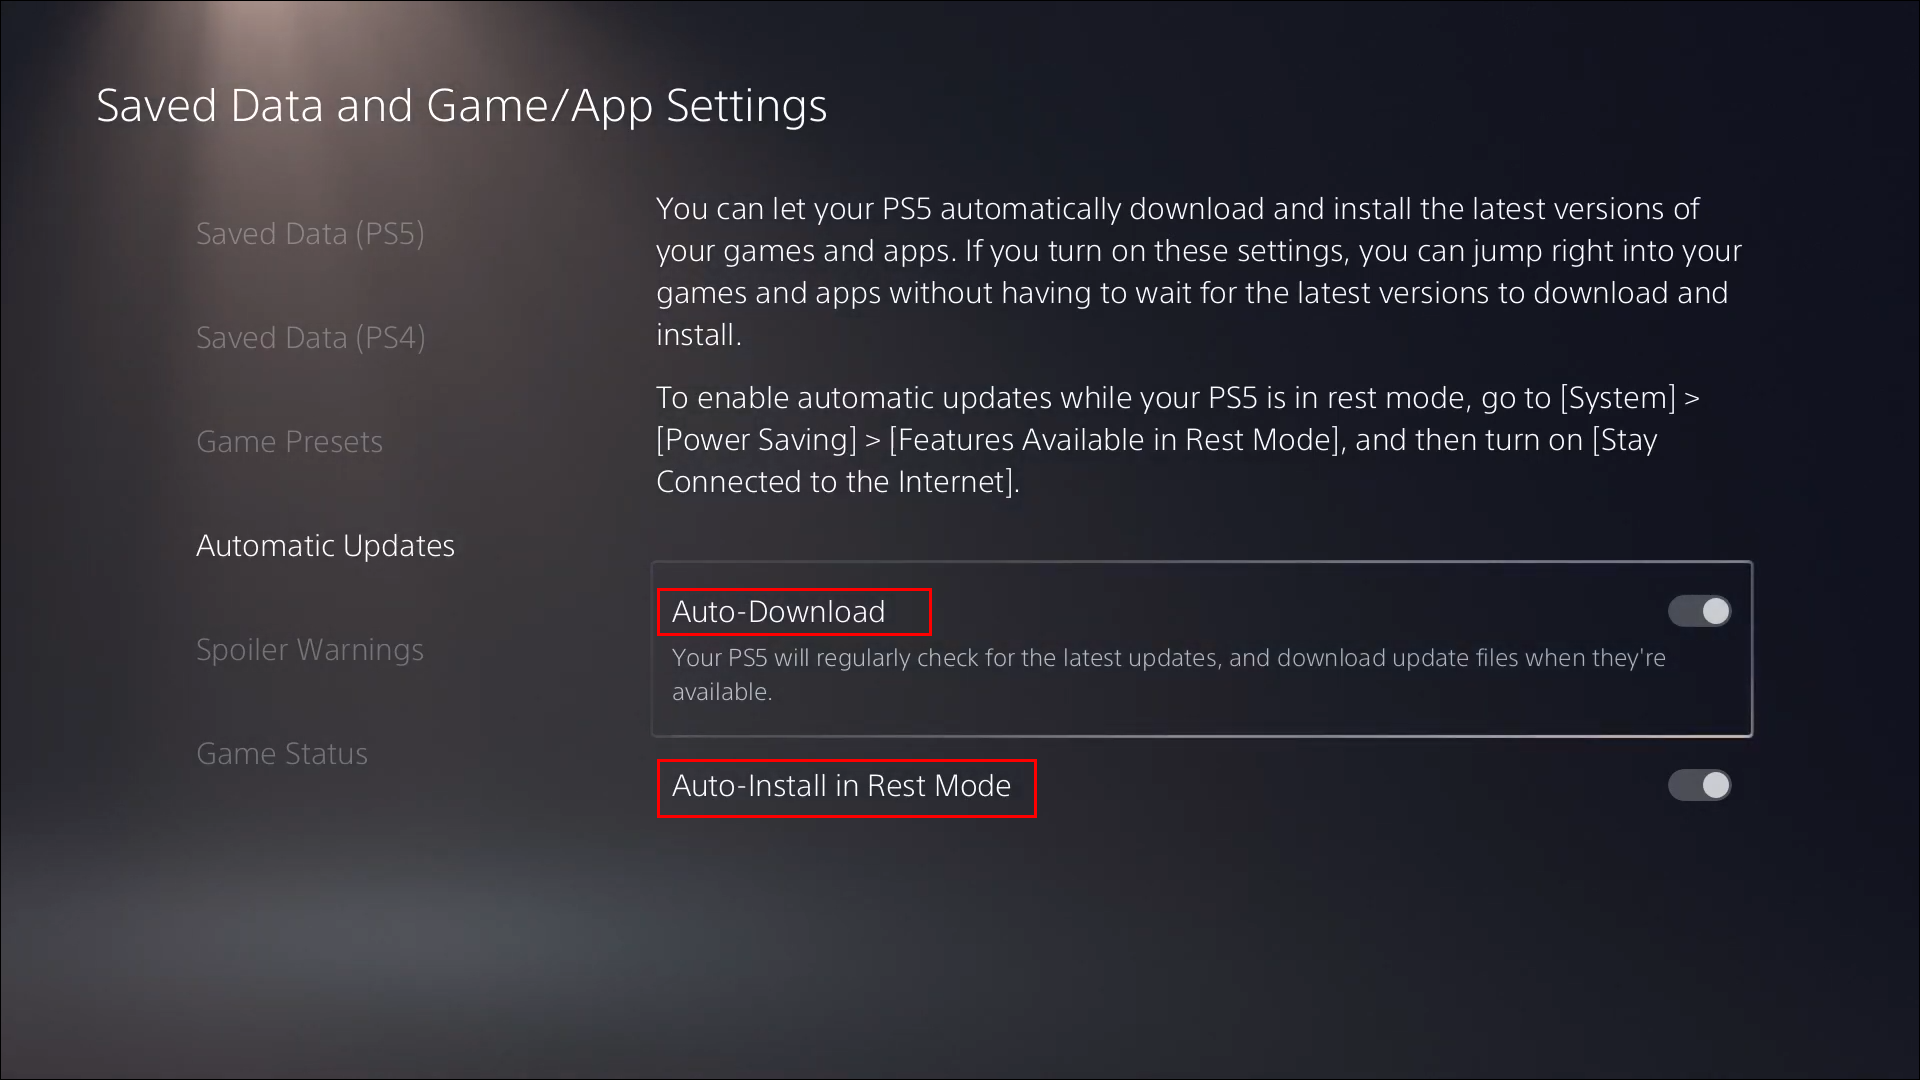 Make sure you have the correct patch version for your game.
Check that the game is installed in the correct directory.